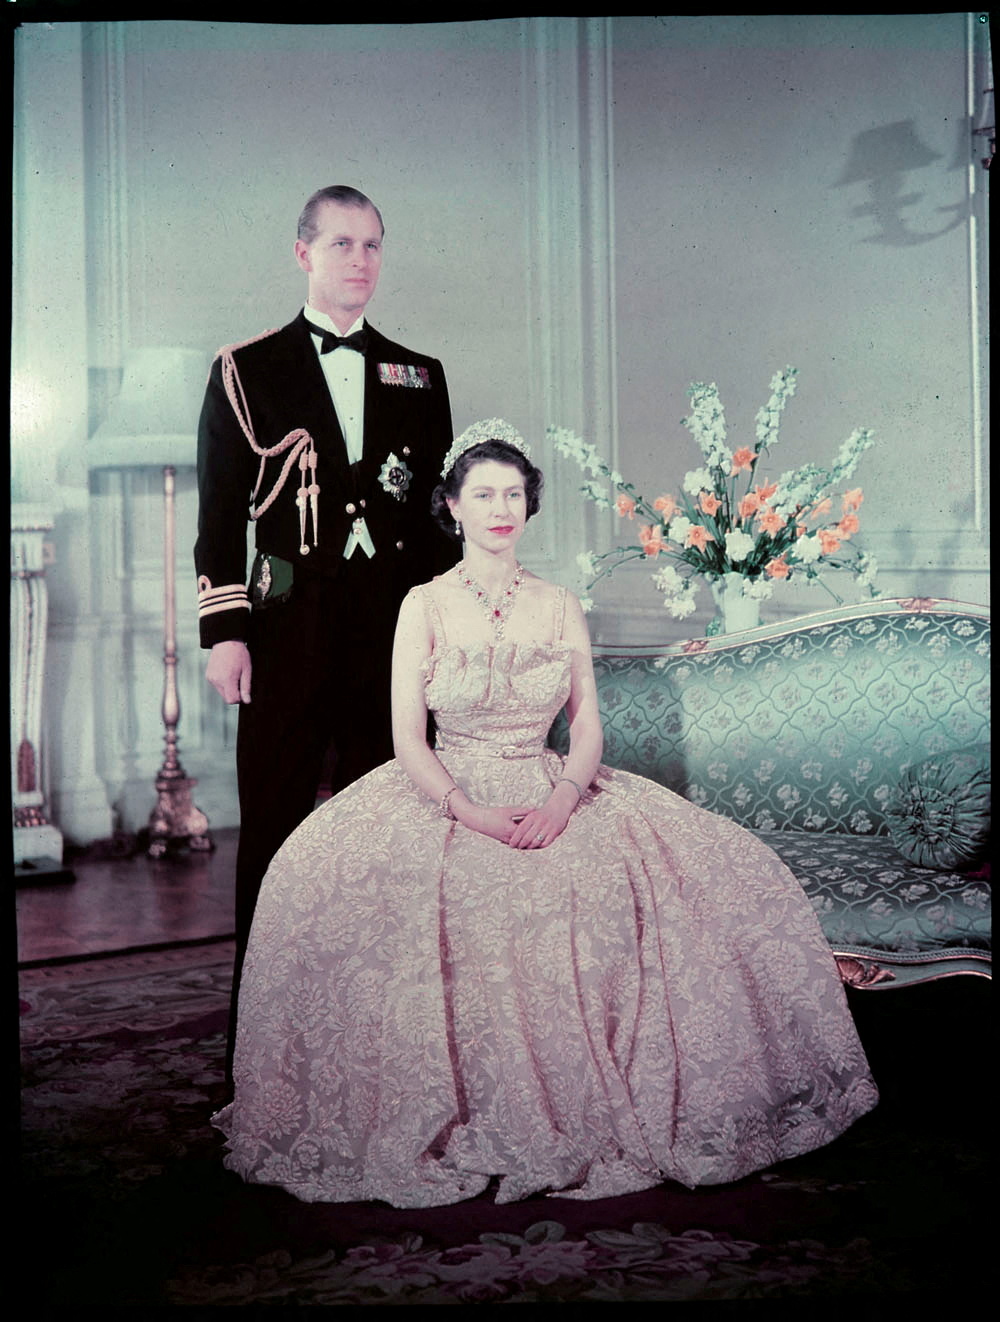 Queen Elizabeth II and Prince Philip pose  for a portrait at Buckingham Palace in London